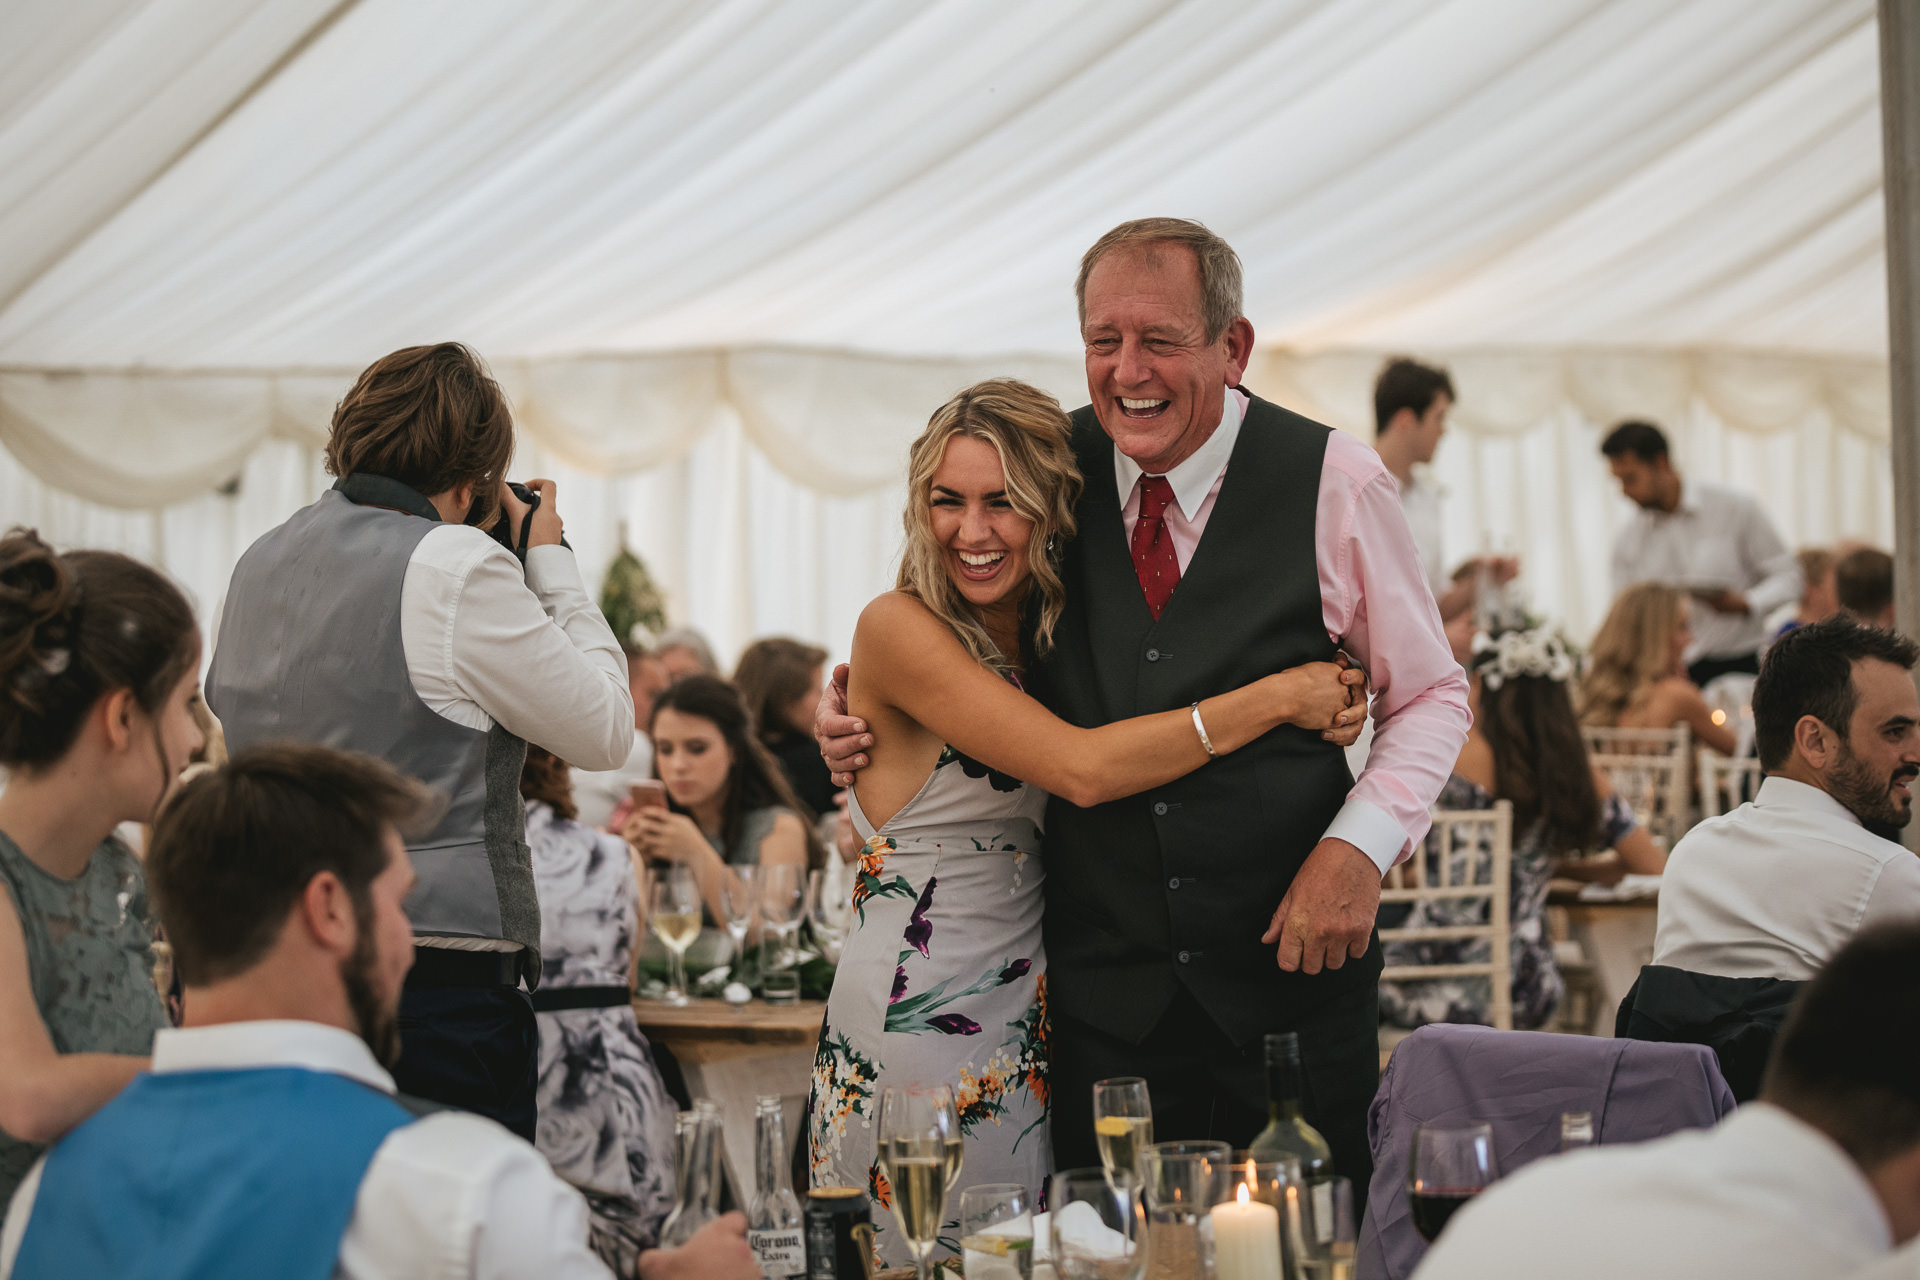 Wedding guests chatting in a marquee